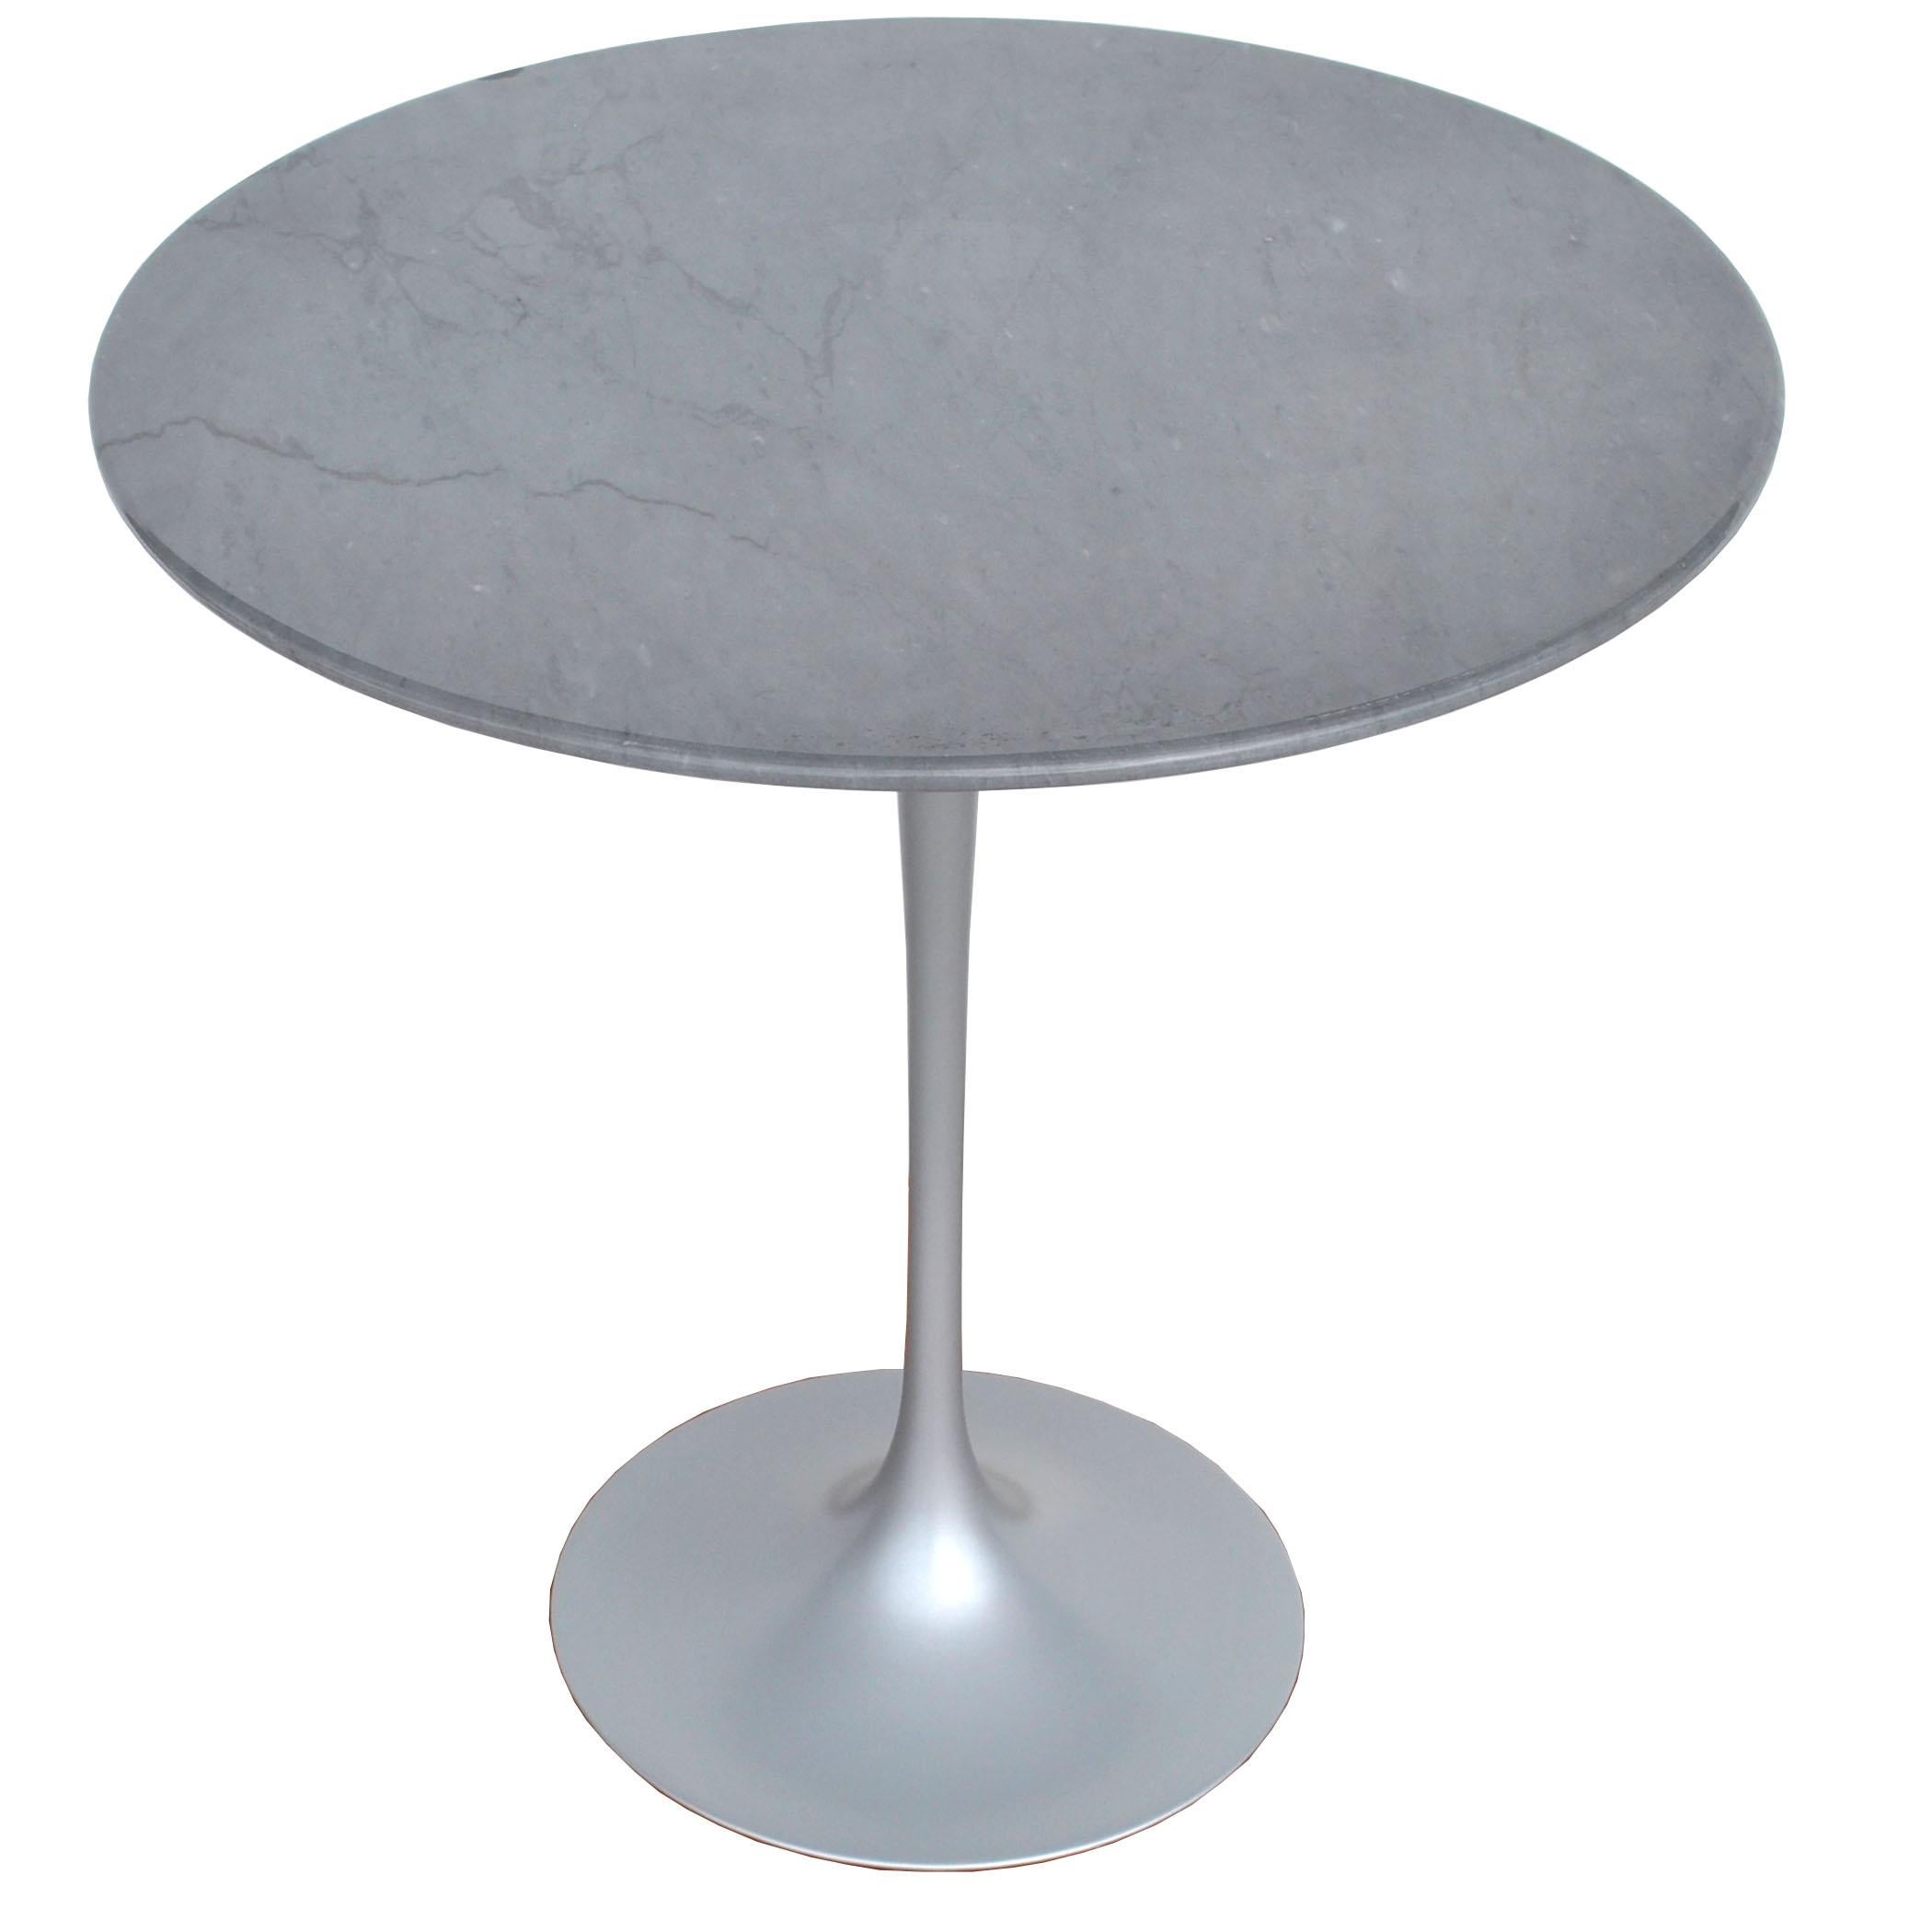  

20in Vintage Saarinen Marble Tulip Table.

Unique version of this Classic design with a silver base and rich grey marble top.
 